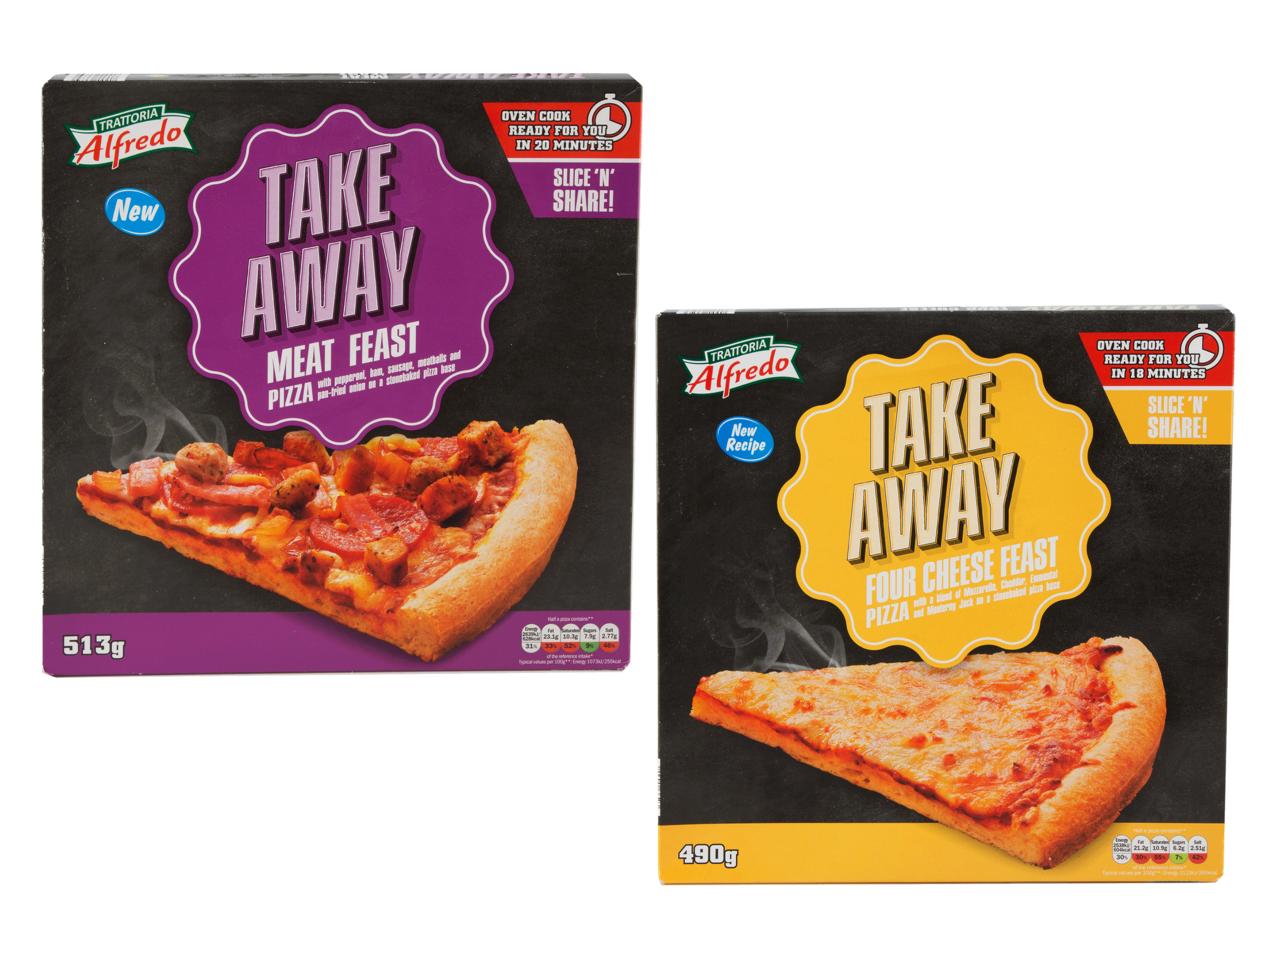 Takeaway Pizza Lidl Ireland Specials Archive